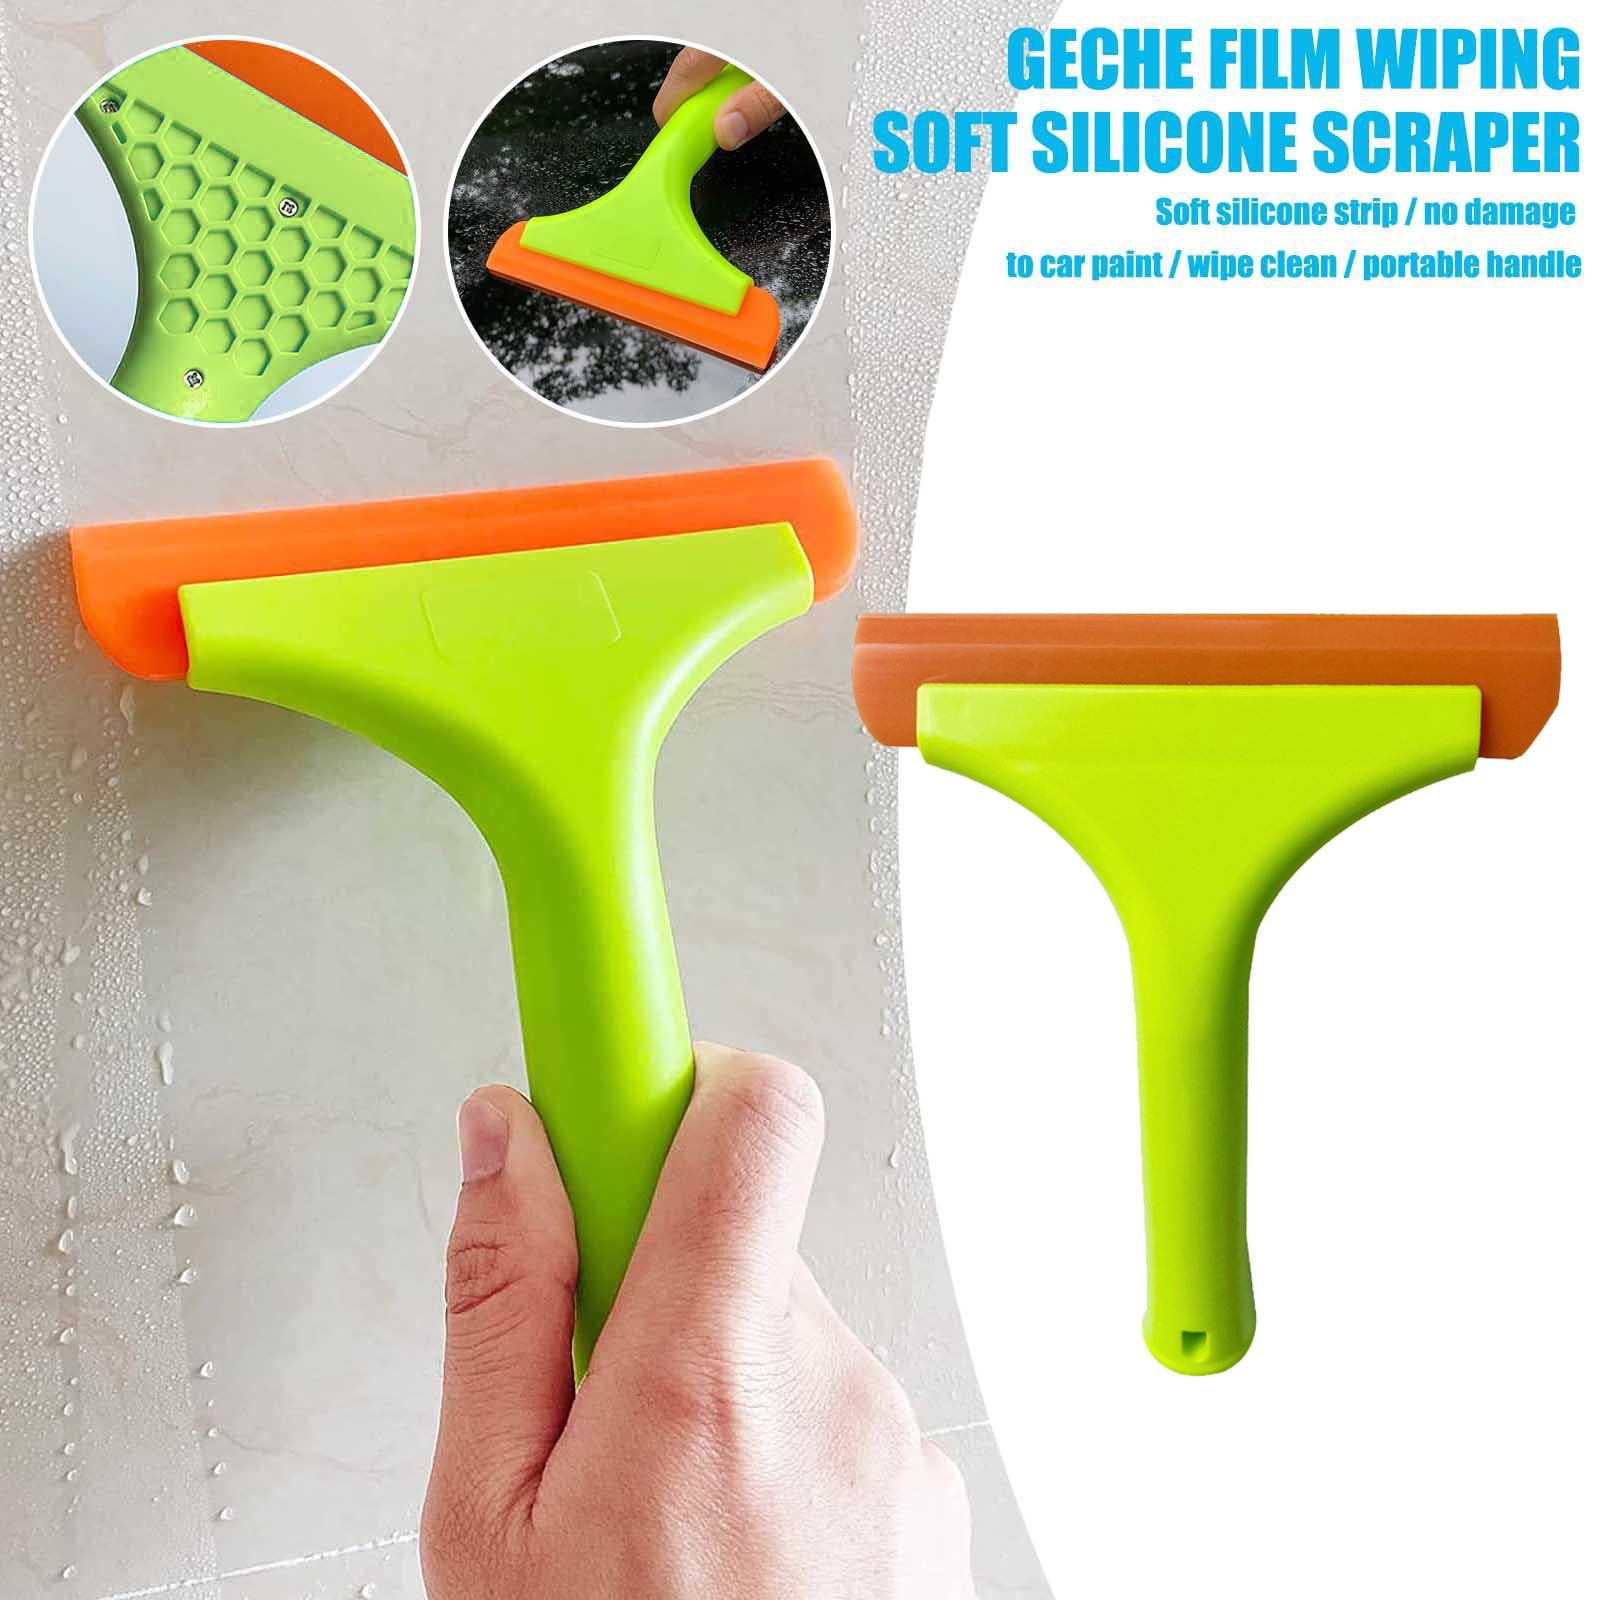 3M Squeegee Car Sticker Scraper With Cloth Glass Cleaner Tool For Car  Wraps, Windows & More From Dhgatetop_company, $0.75